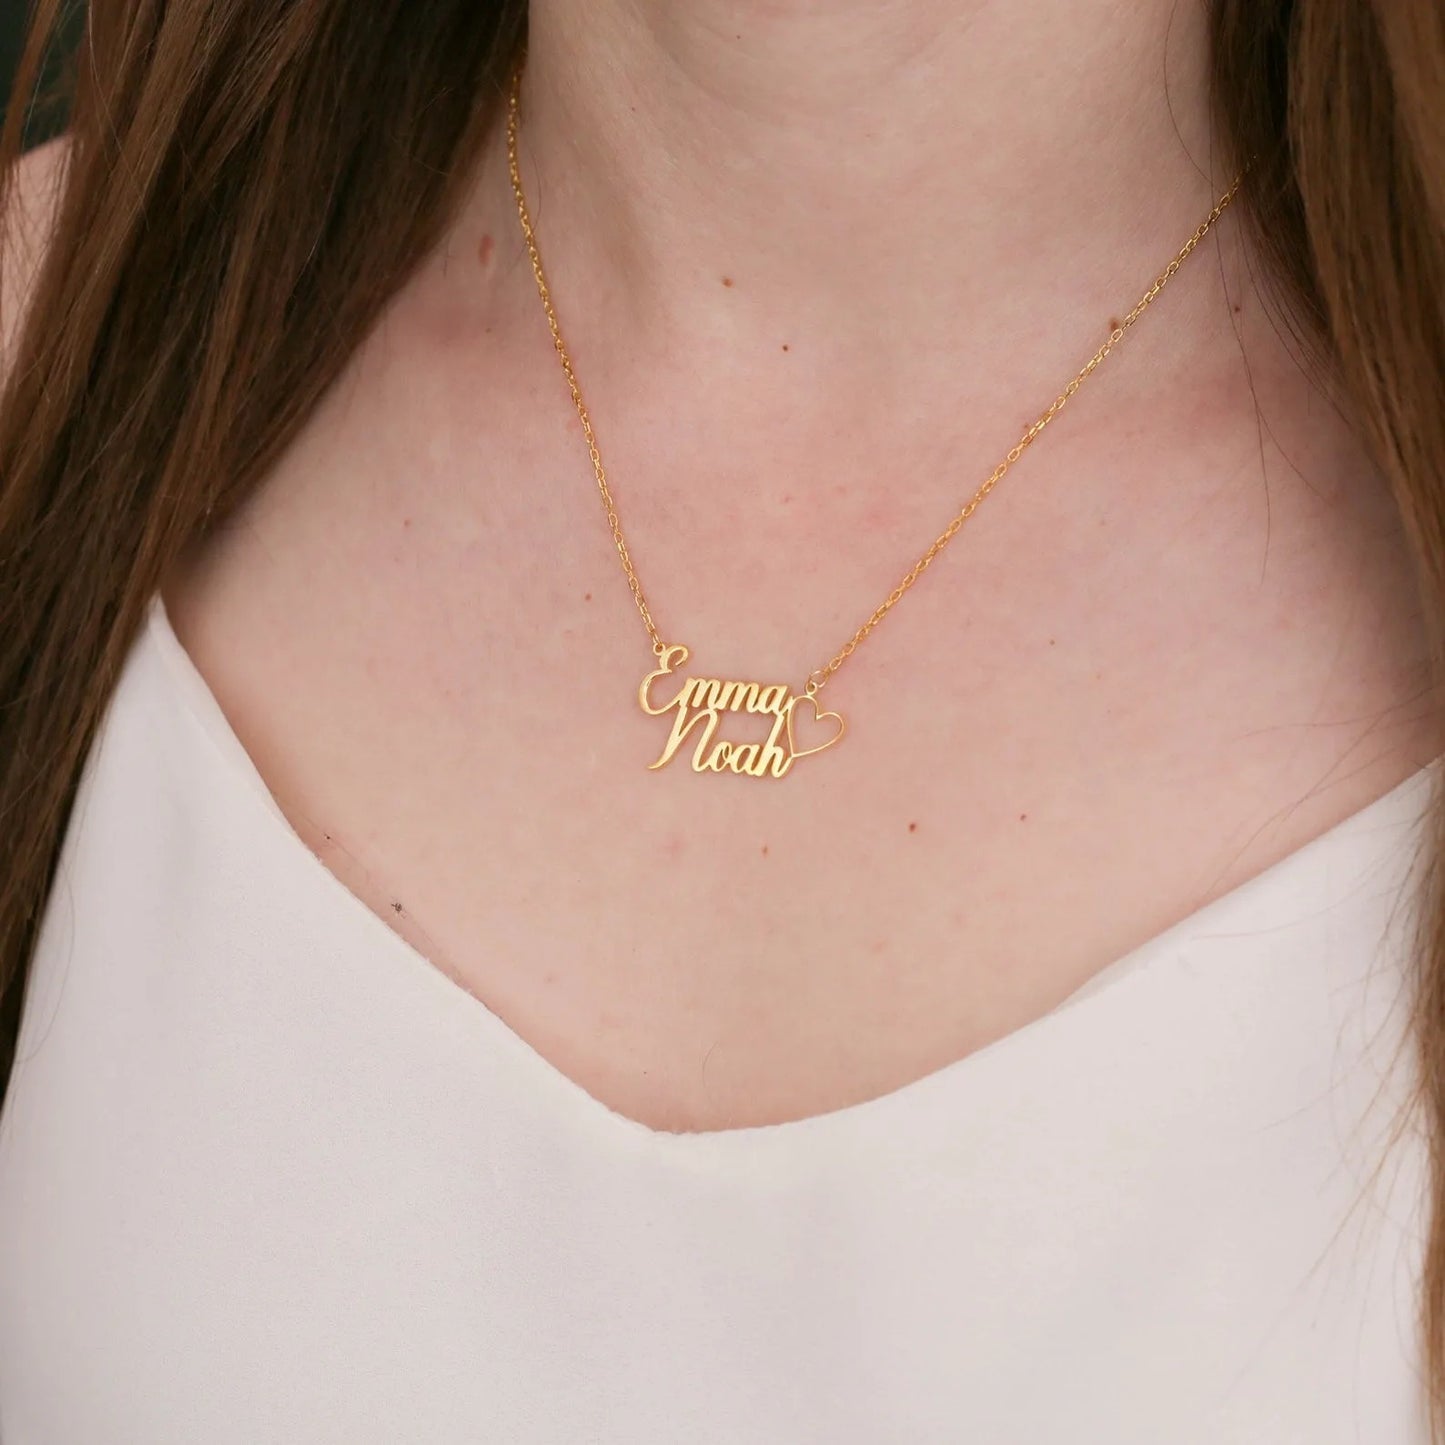 Customize Name Necklace (AD029)